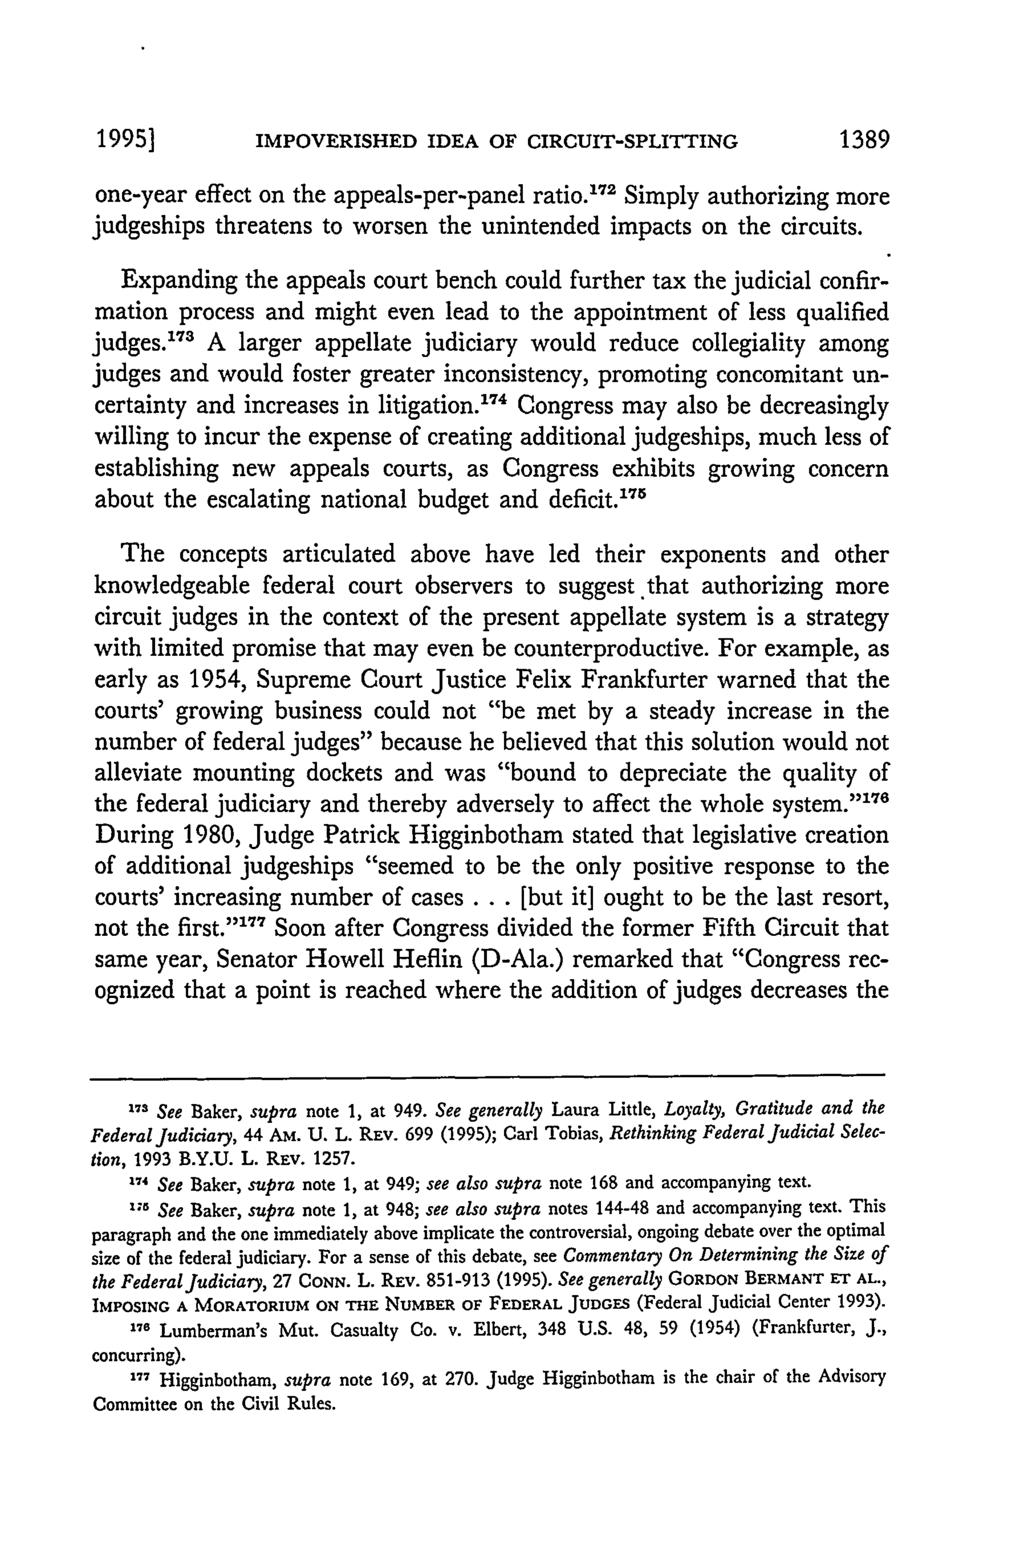 1995] IMPOVERISHED IDEA OF CIRCUIT-SPLITTING 1389 one-year effect on the appeals-per-panel ratio. 172 Simply authorizing more judgeships threatens to worsen the unintended impacts on the circuits.